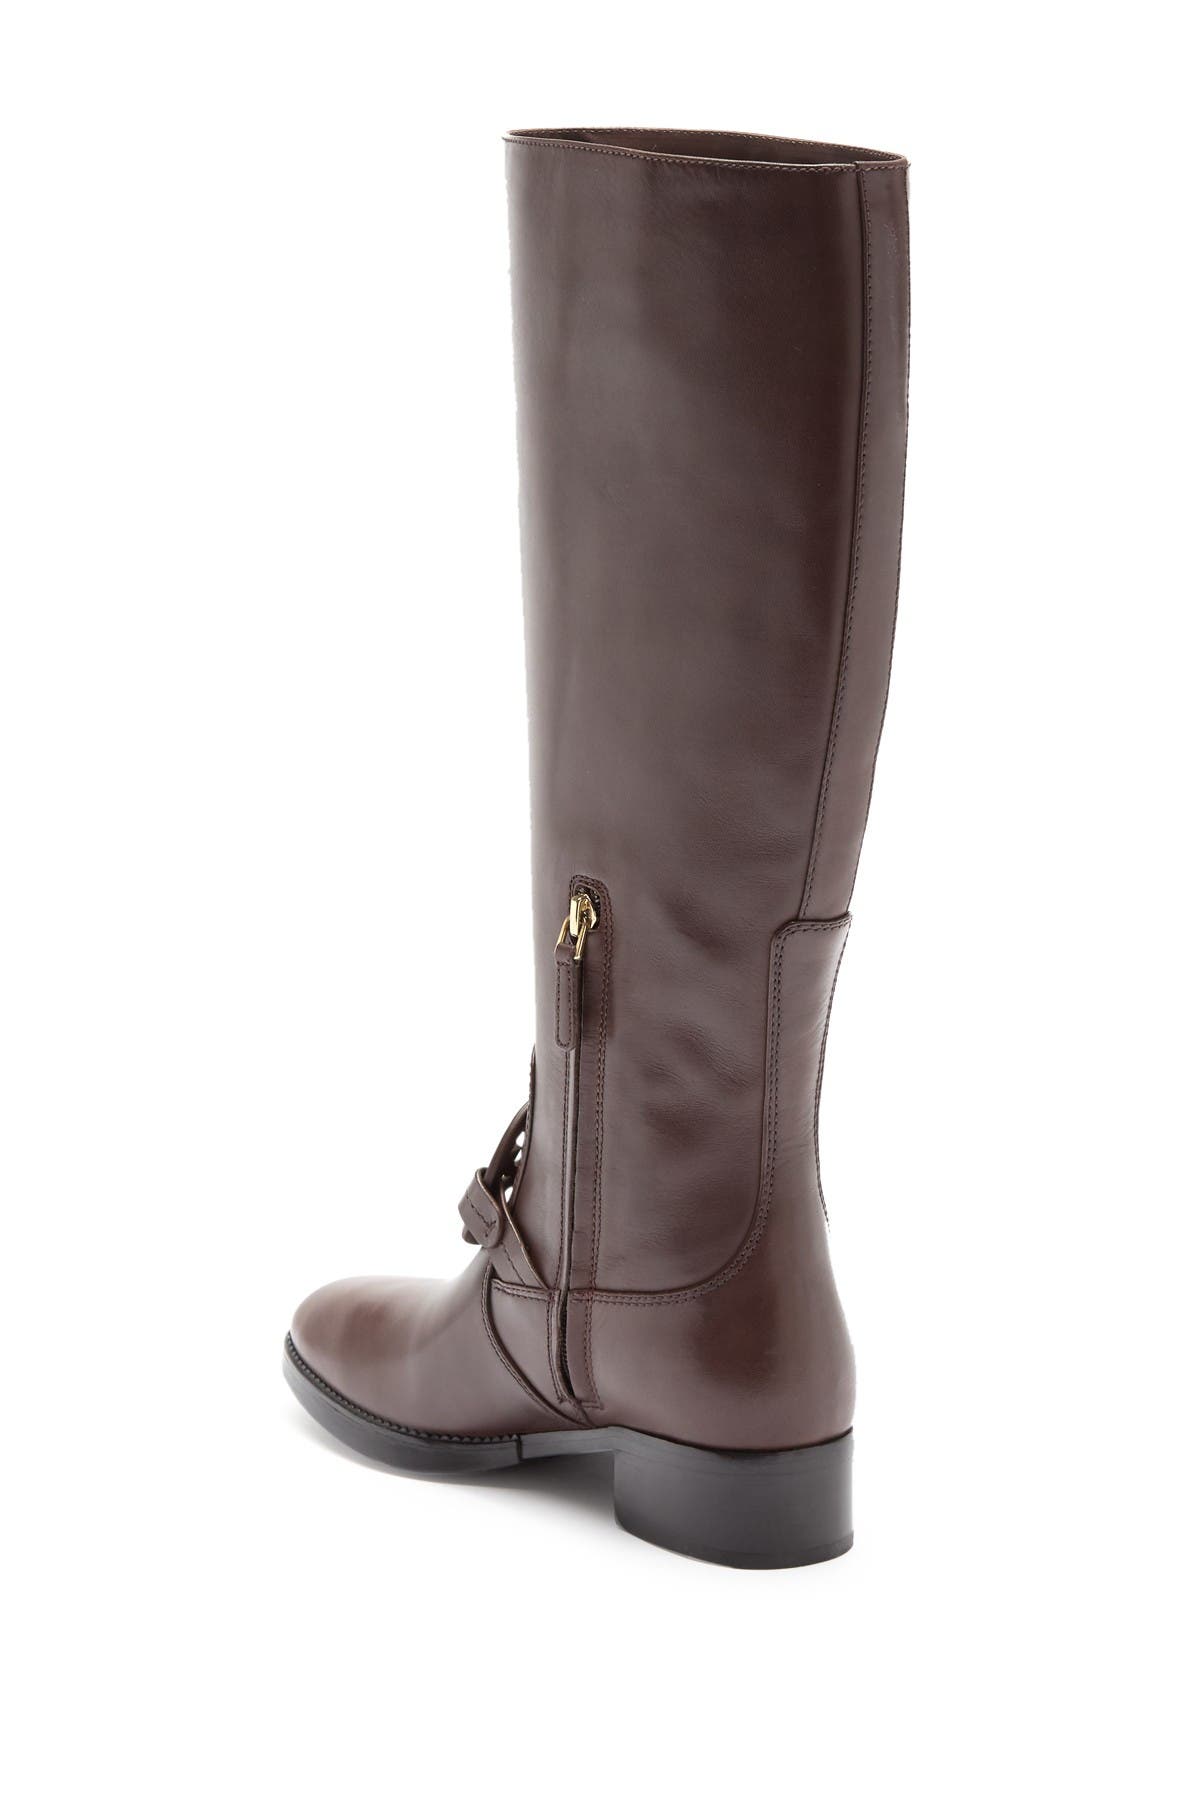 tory burch miller pull on boots